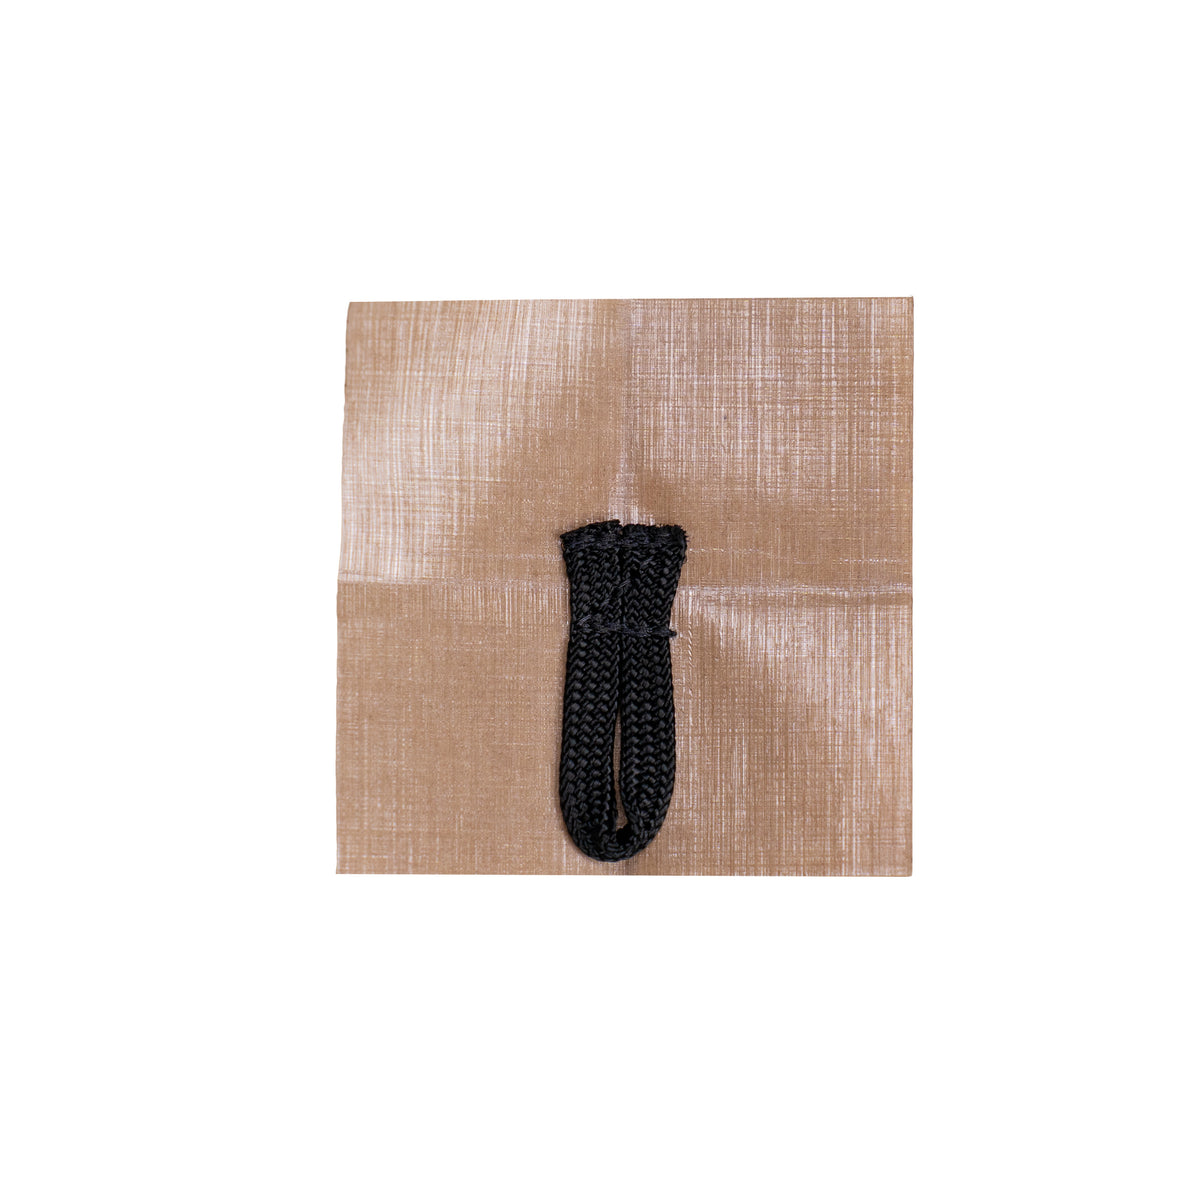 Hook & Loop Patch Wall / Patch Holder (Color: Black / Small)